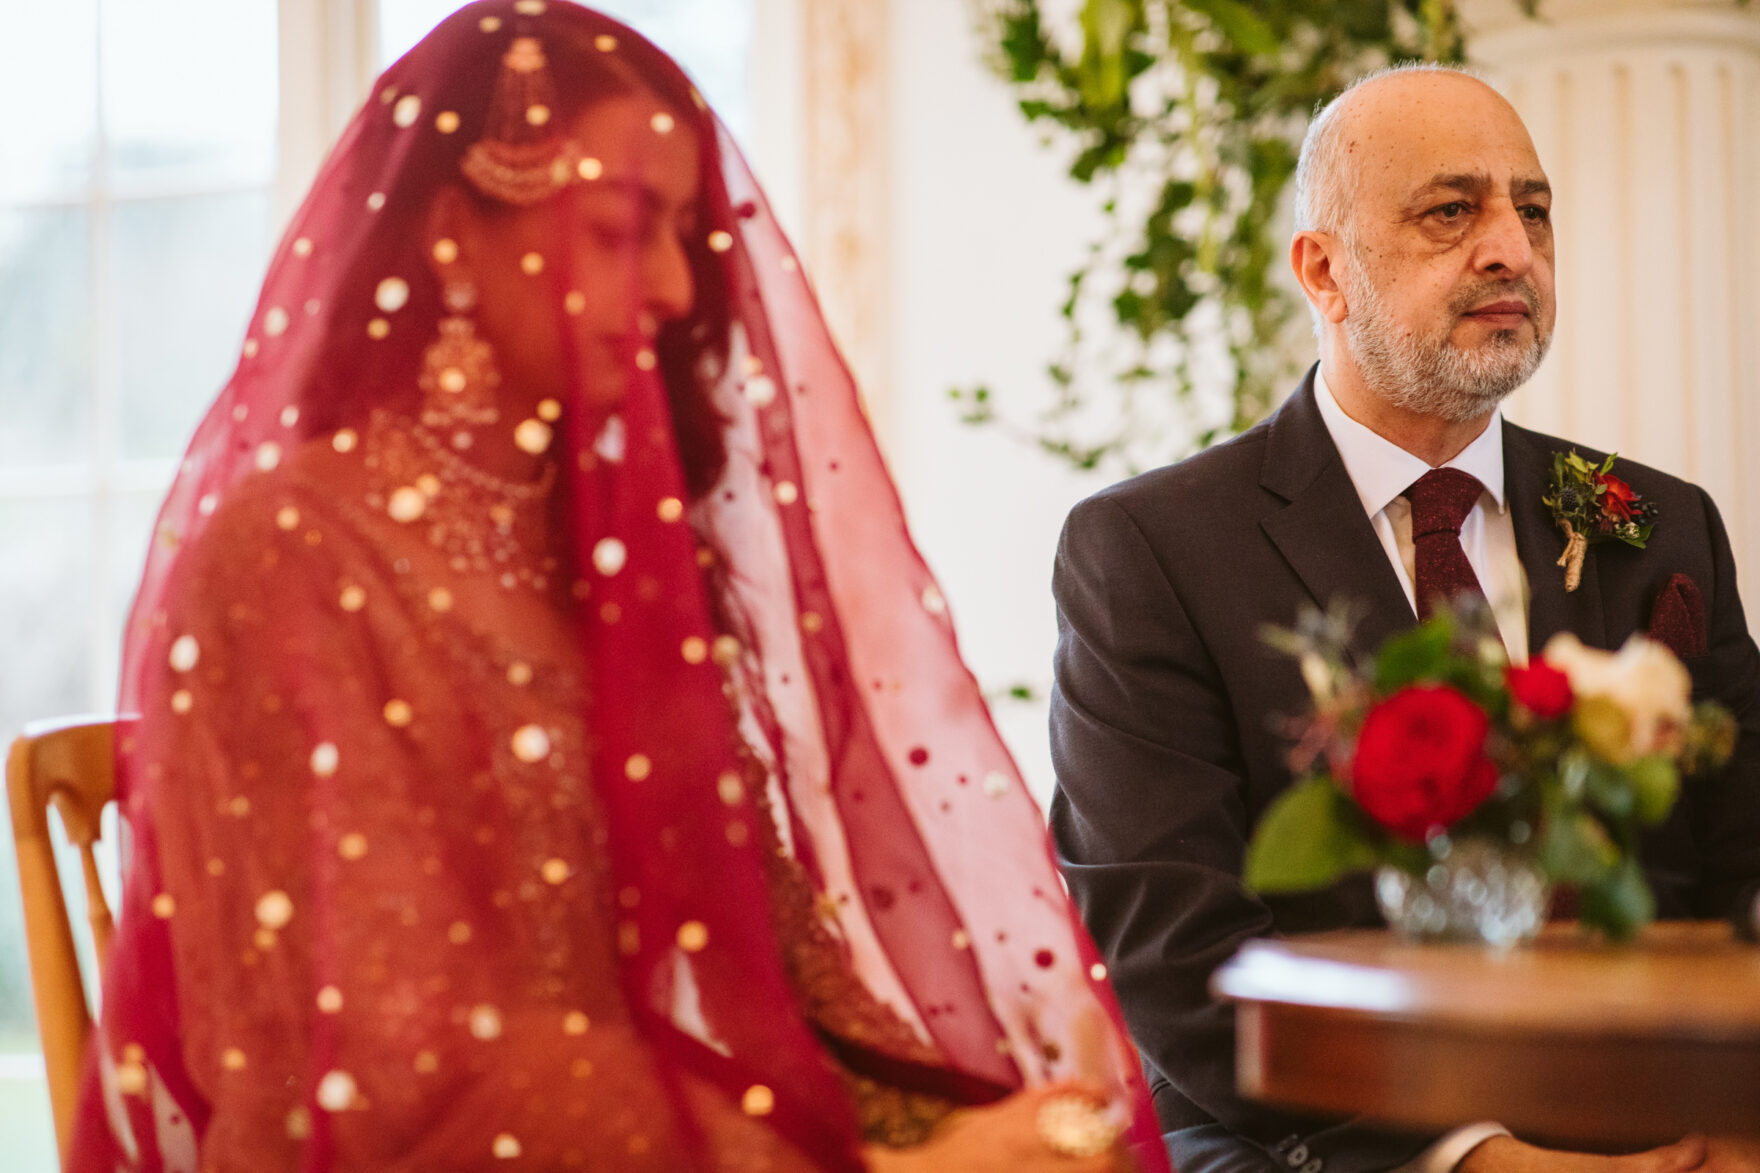 Asian Bride's father praying at a wedding ceremony